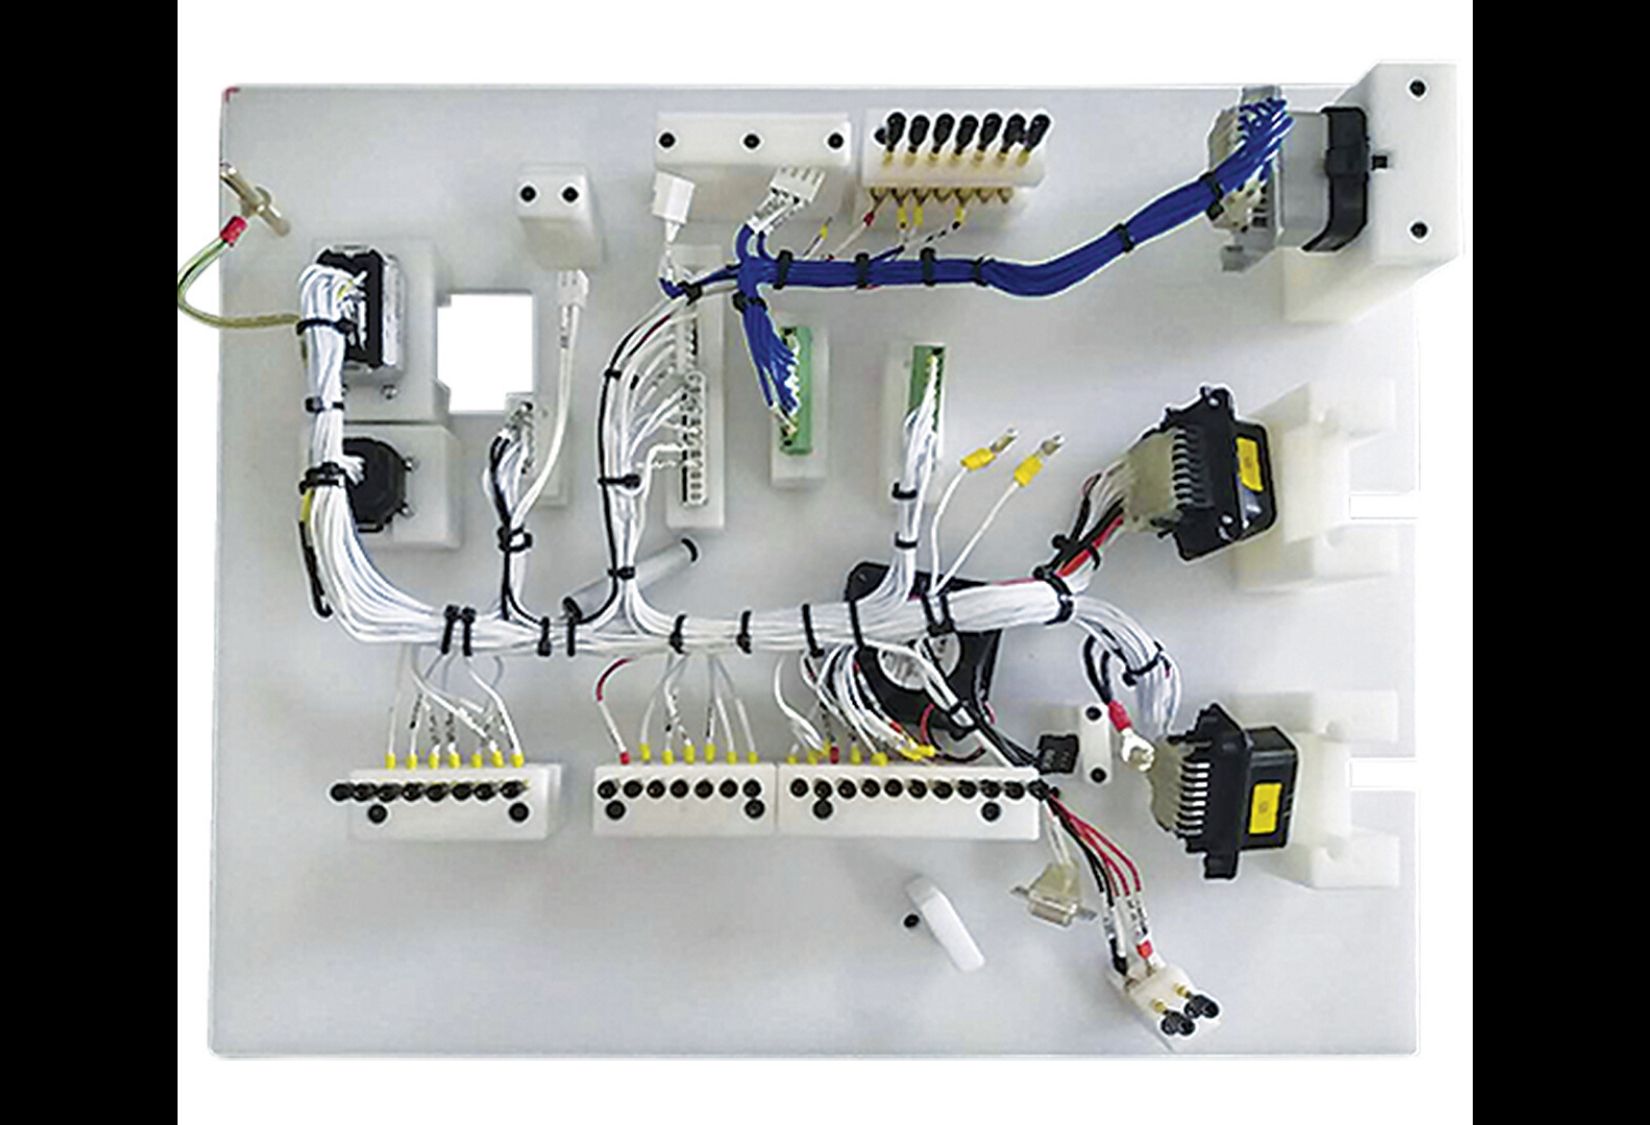 Harness assembled in master controller used in 1140V Intelligent combination variable frequency starter for mining.